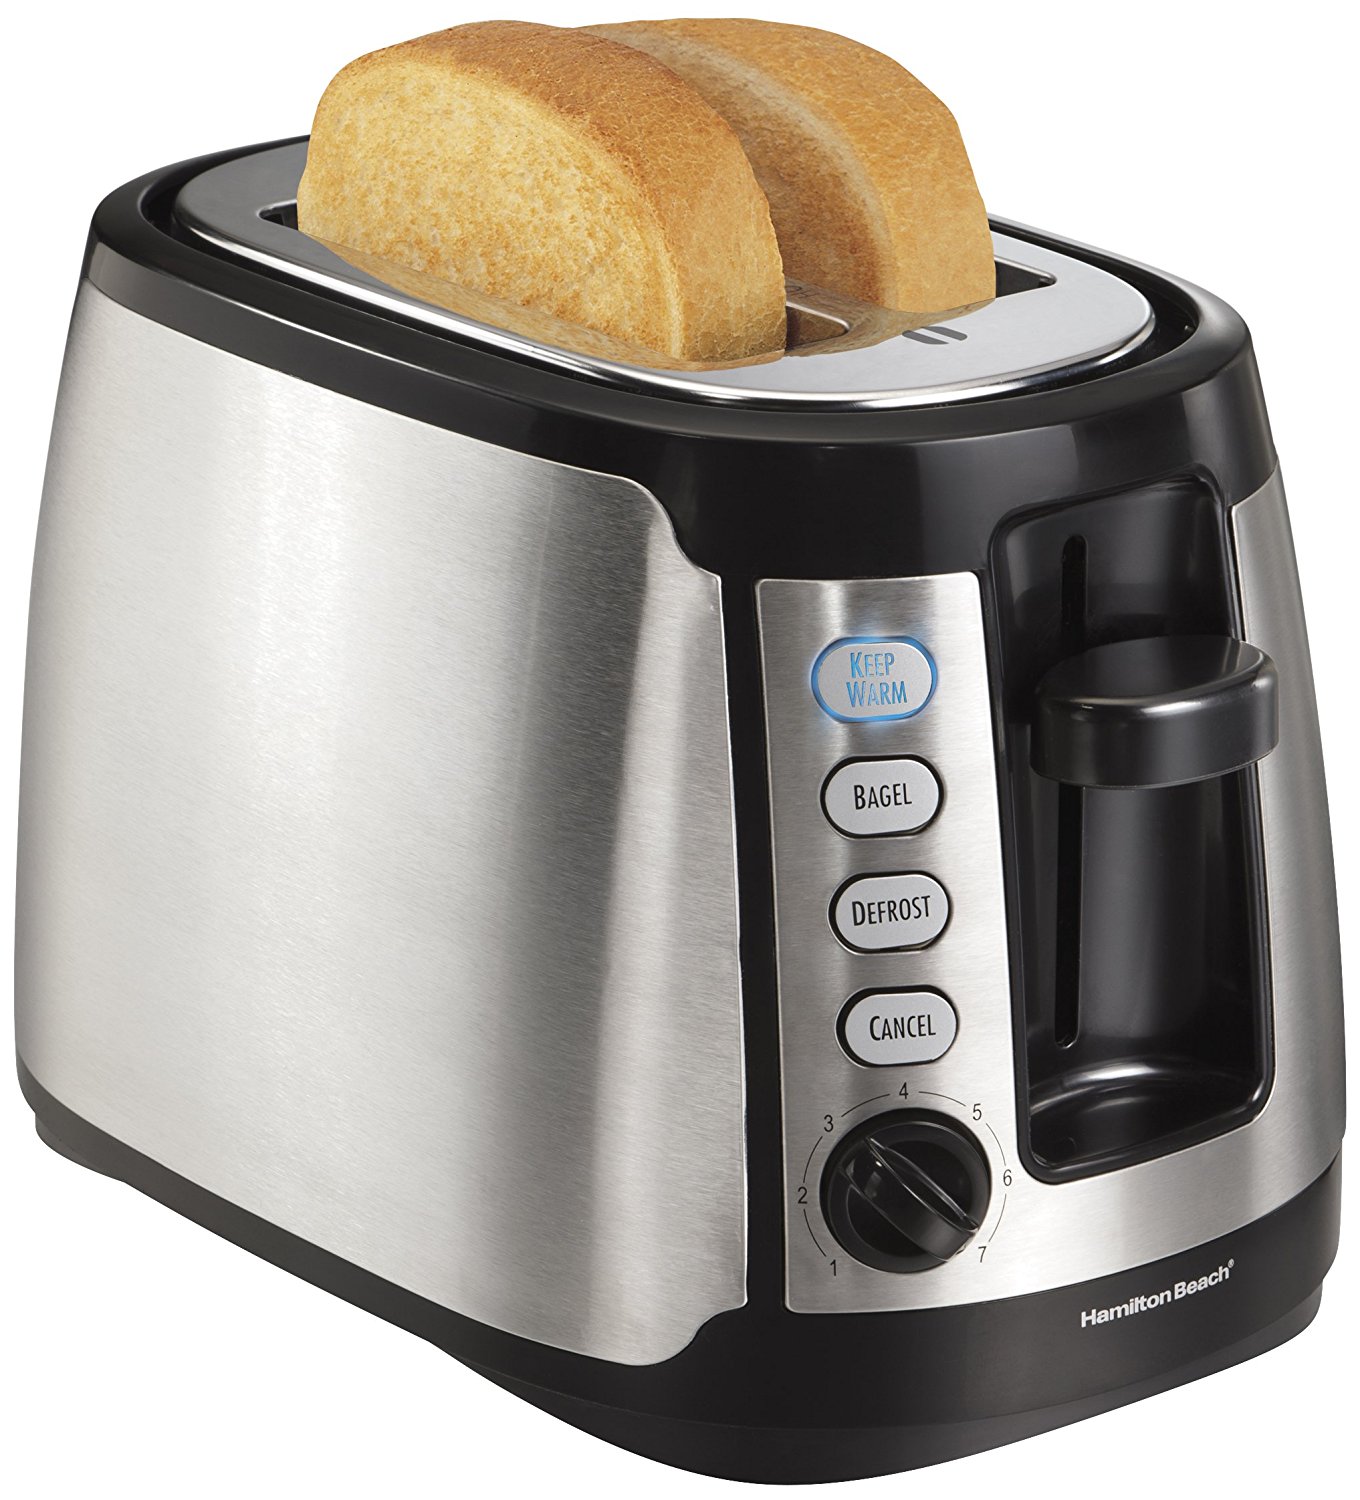 Amazing Toaster Pictures & Backgrounds